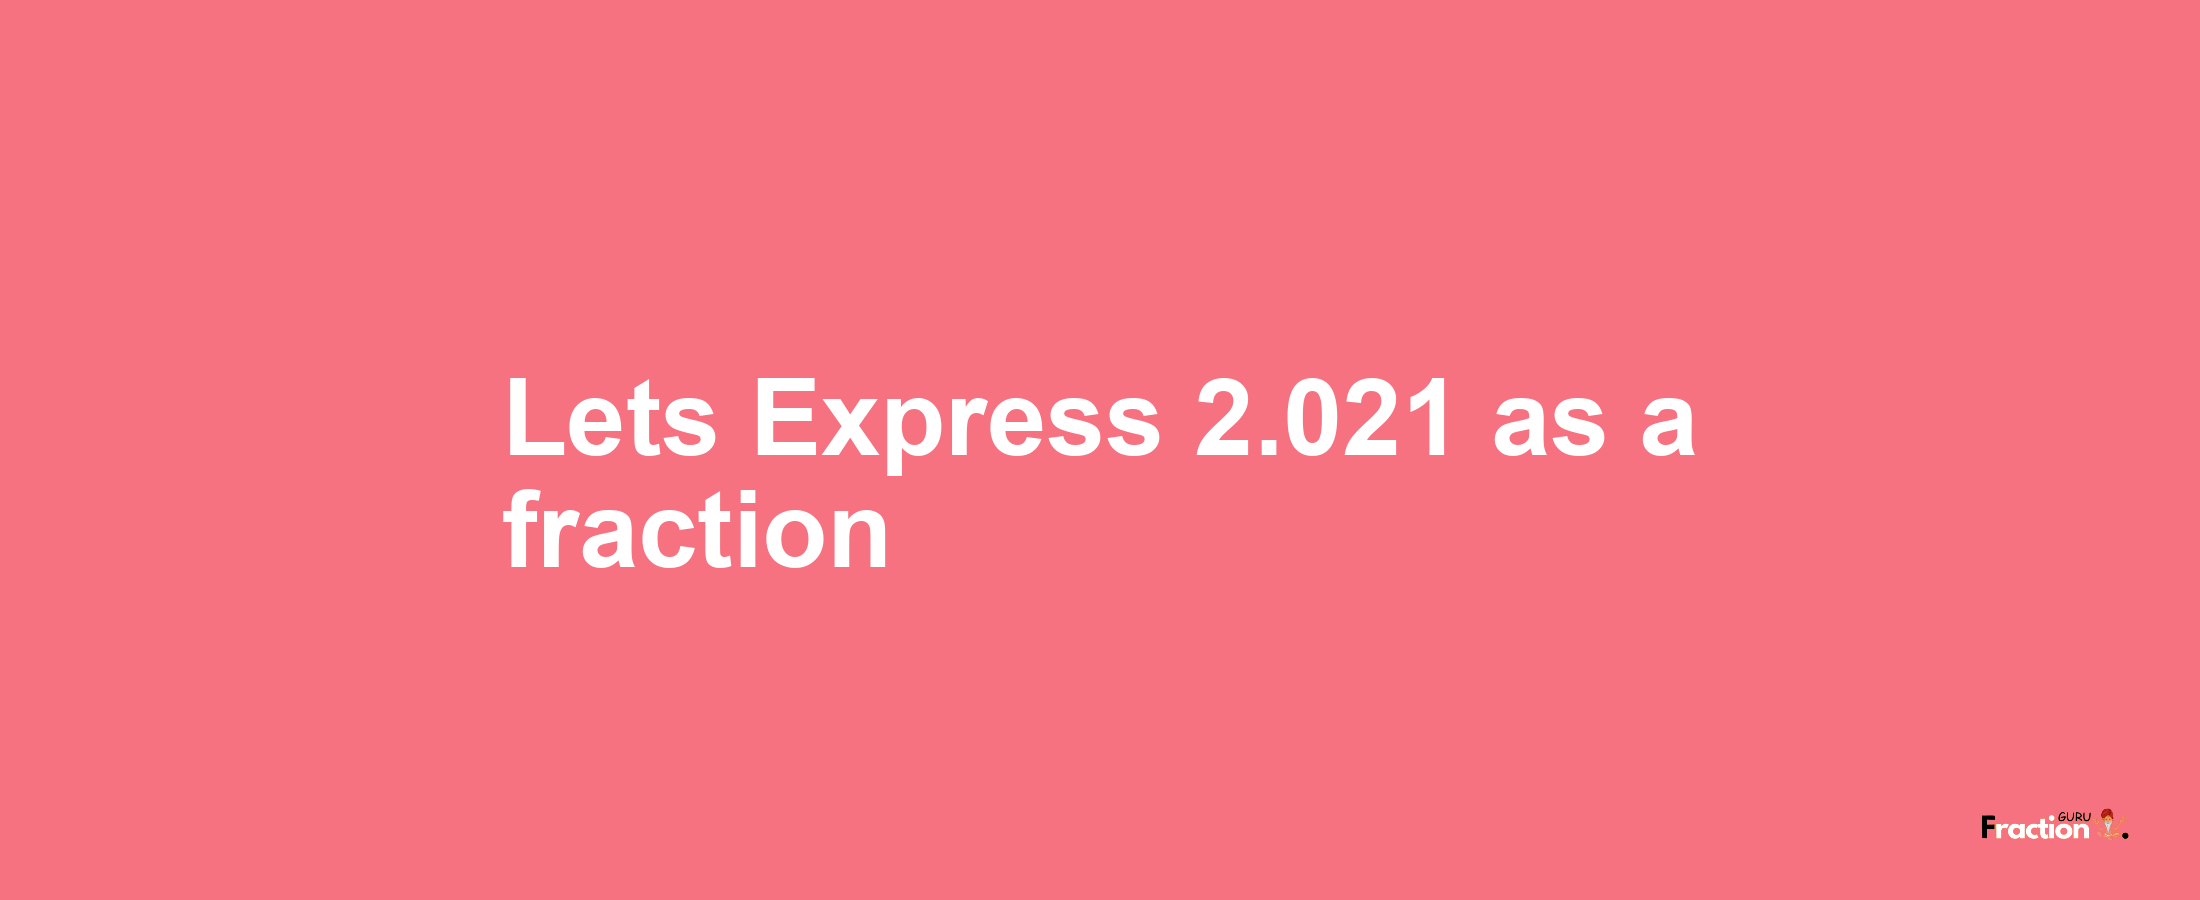 Lets Express 2.021 as afraction